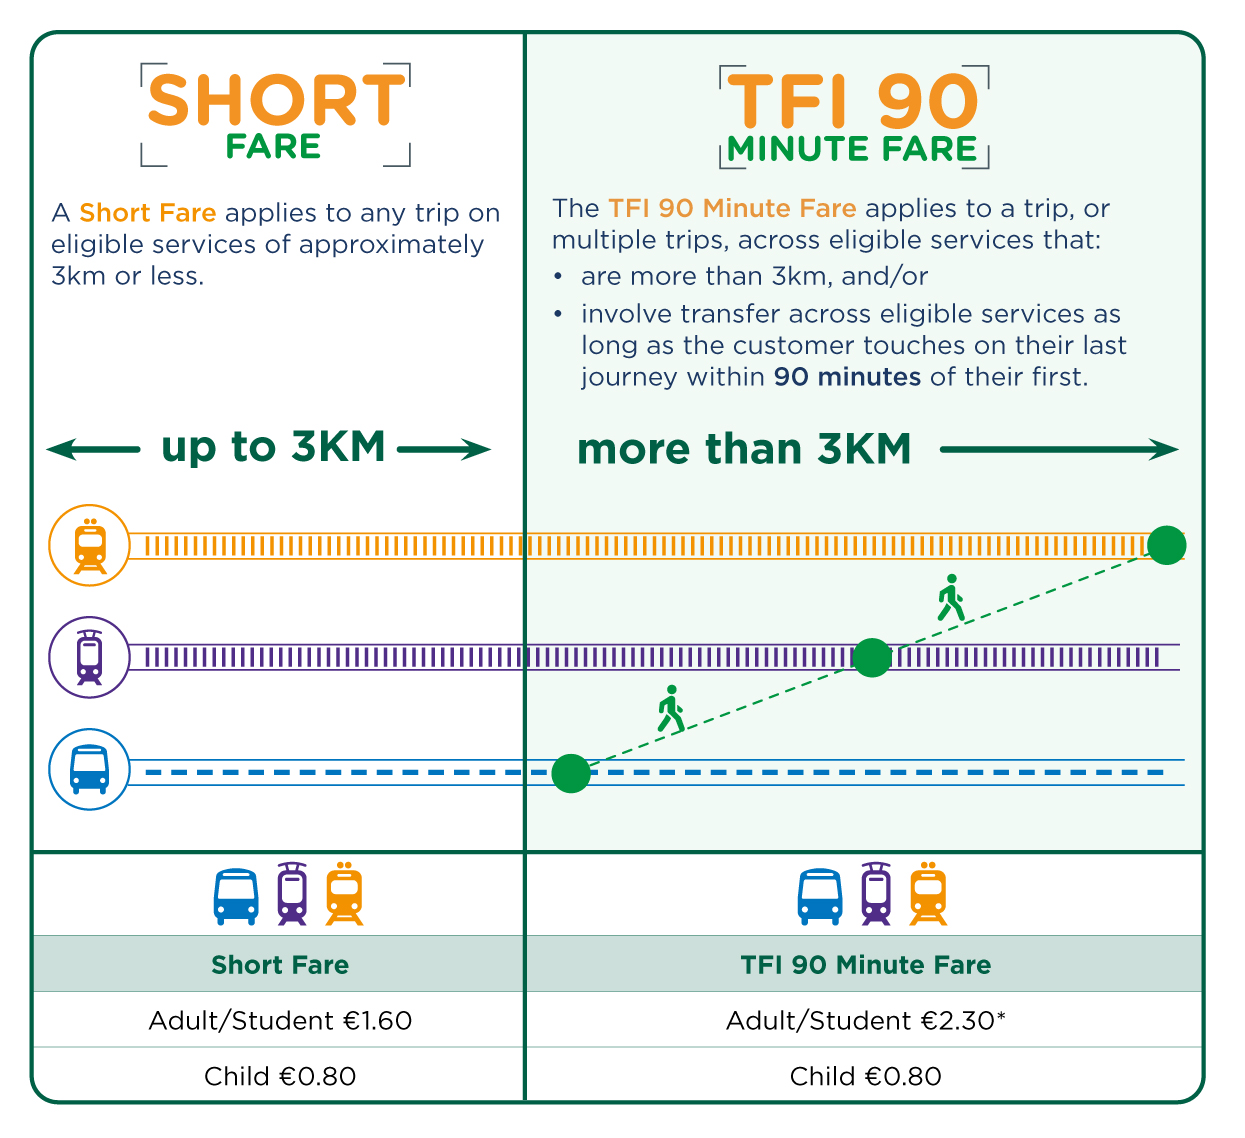 Infographic explaining the difference between the short fare the TFI 90 minute fare